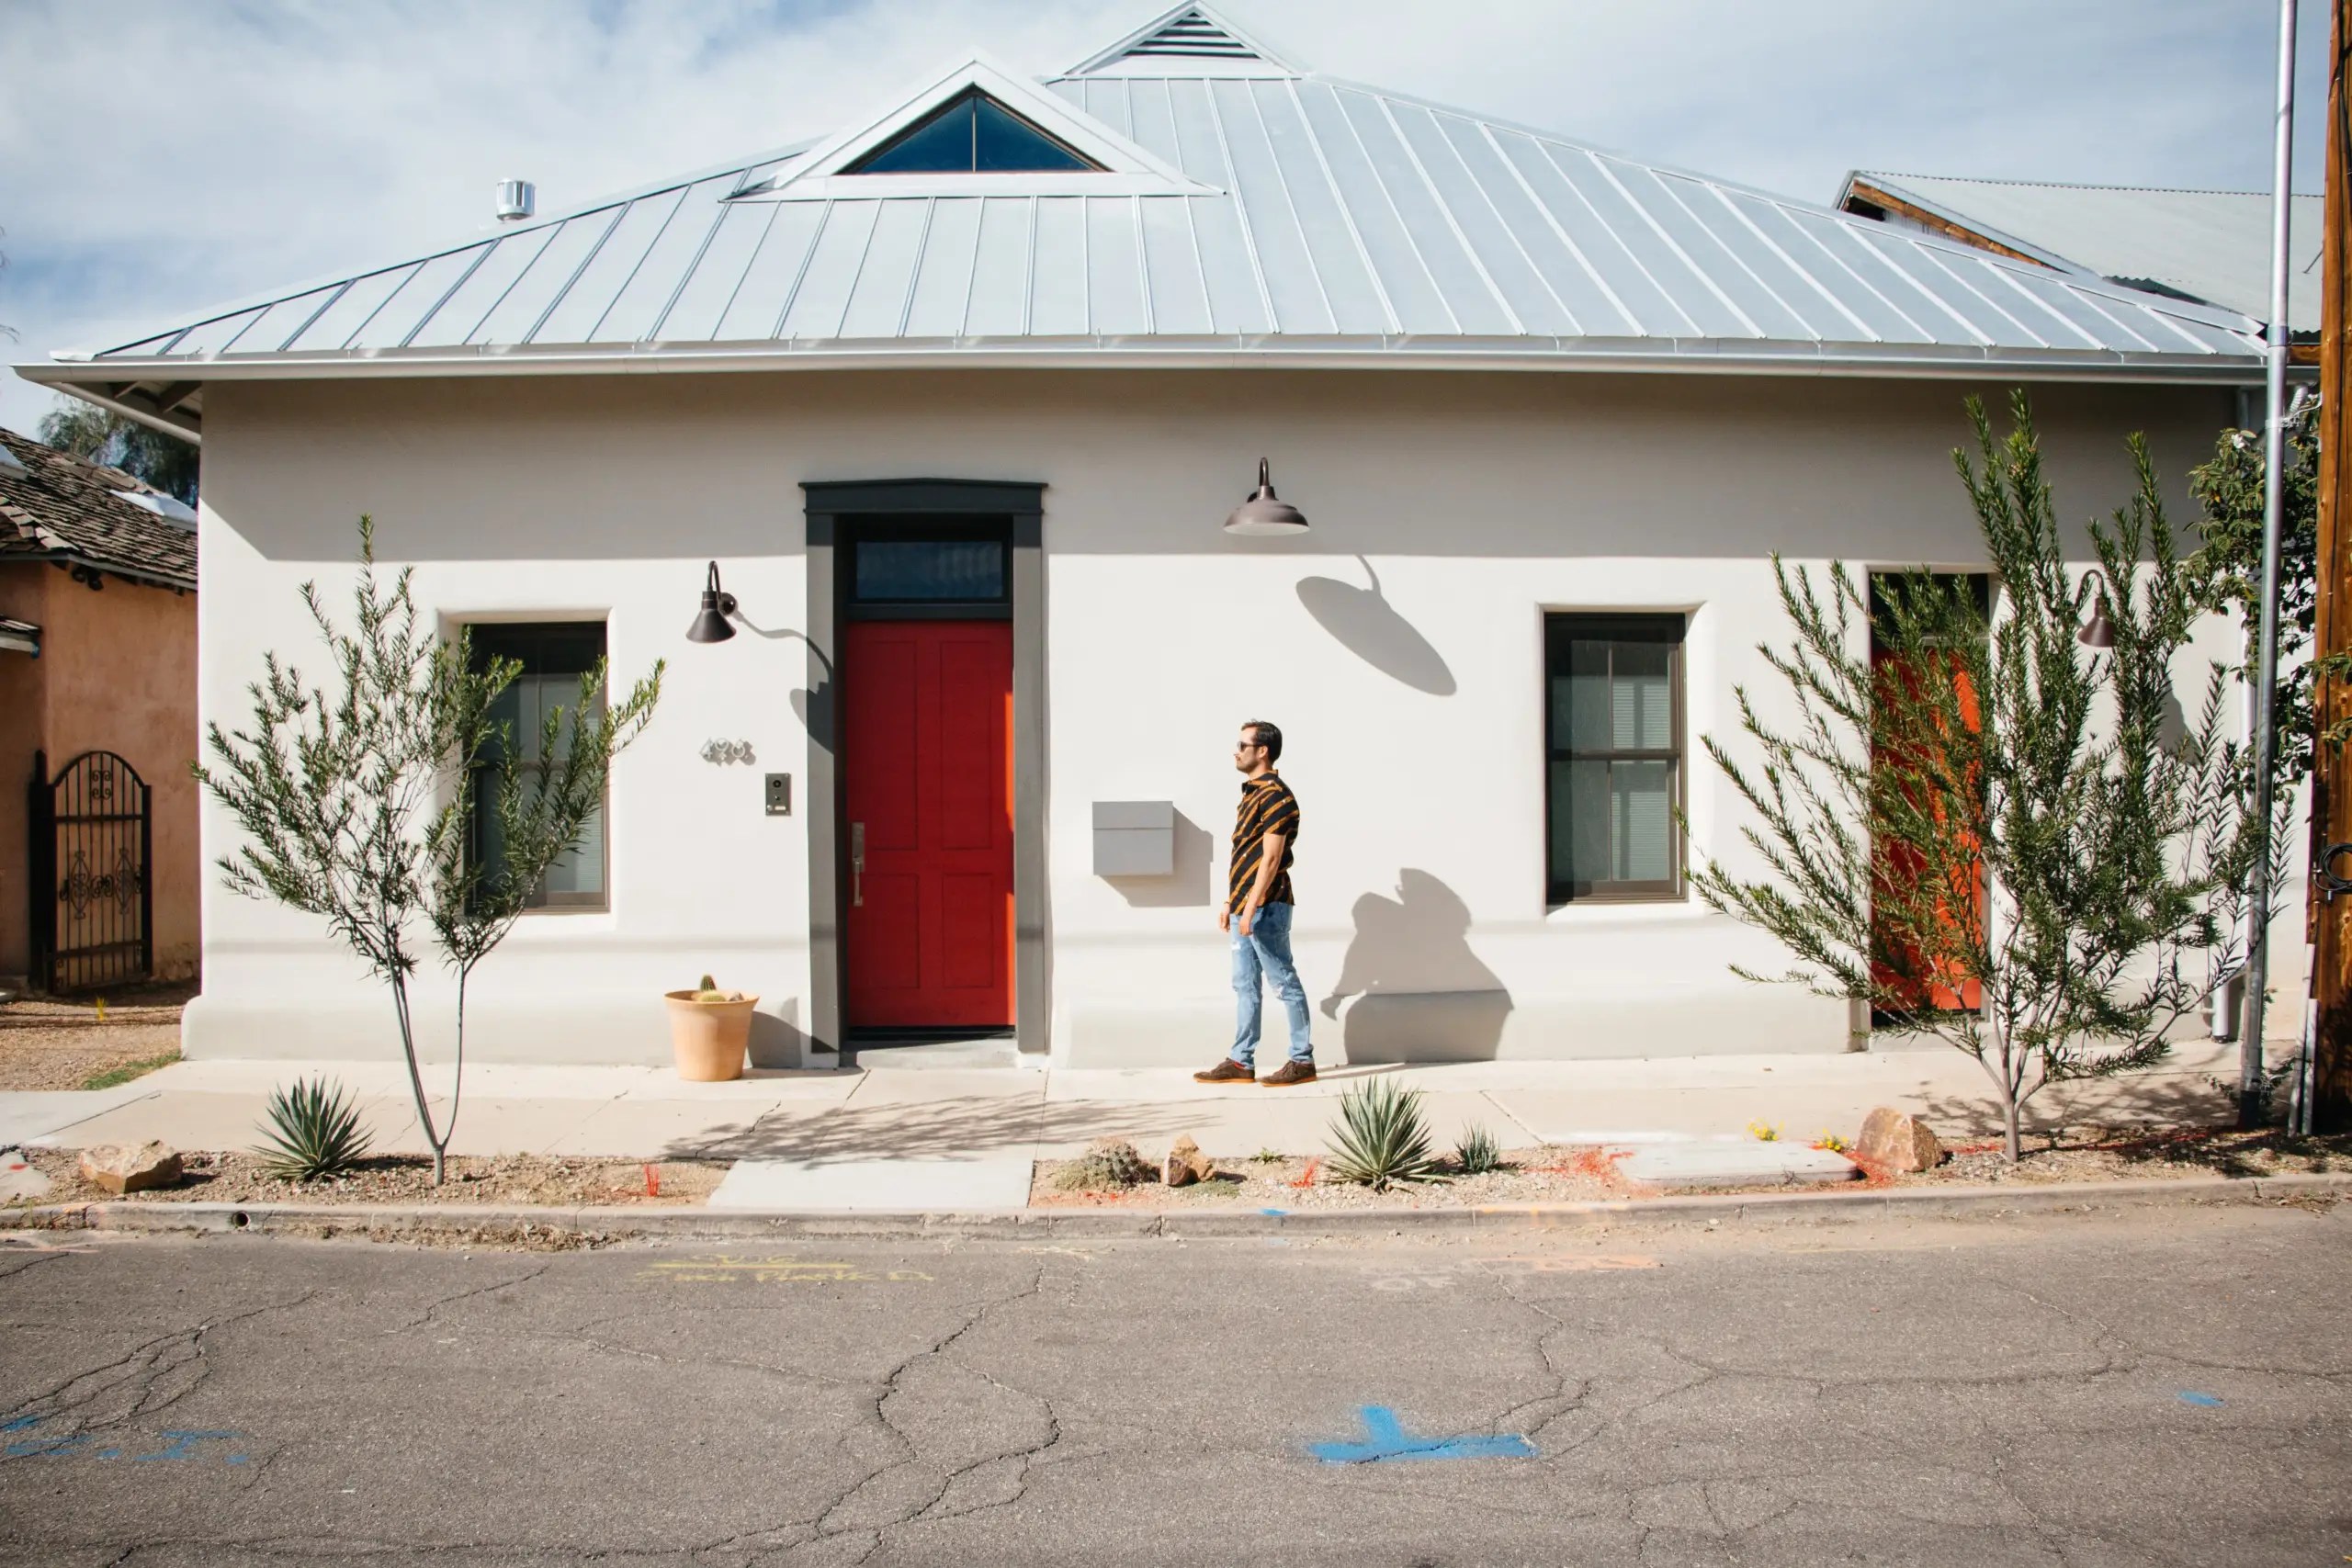 Man standing in front of a Tucson Arizona home